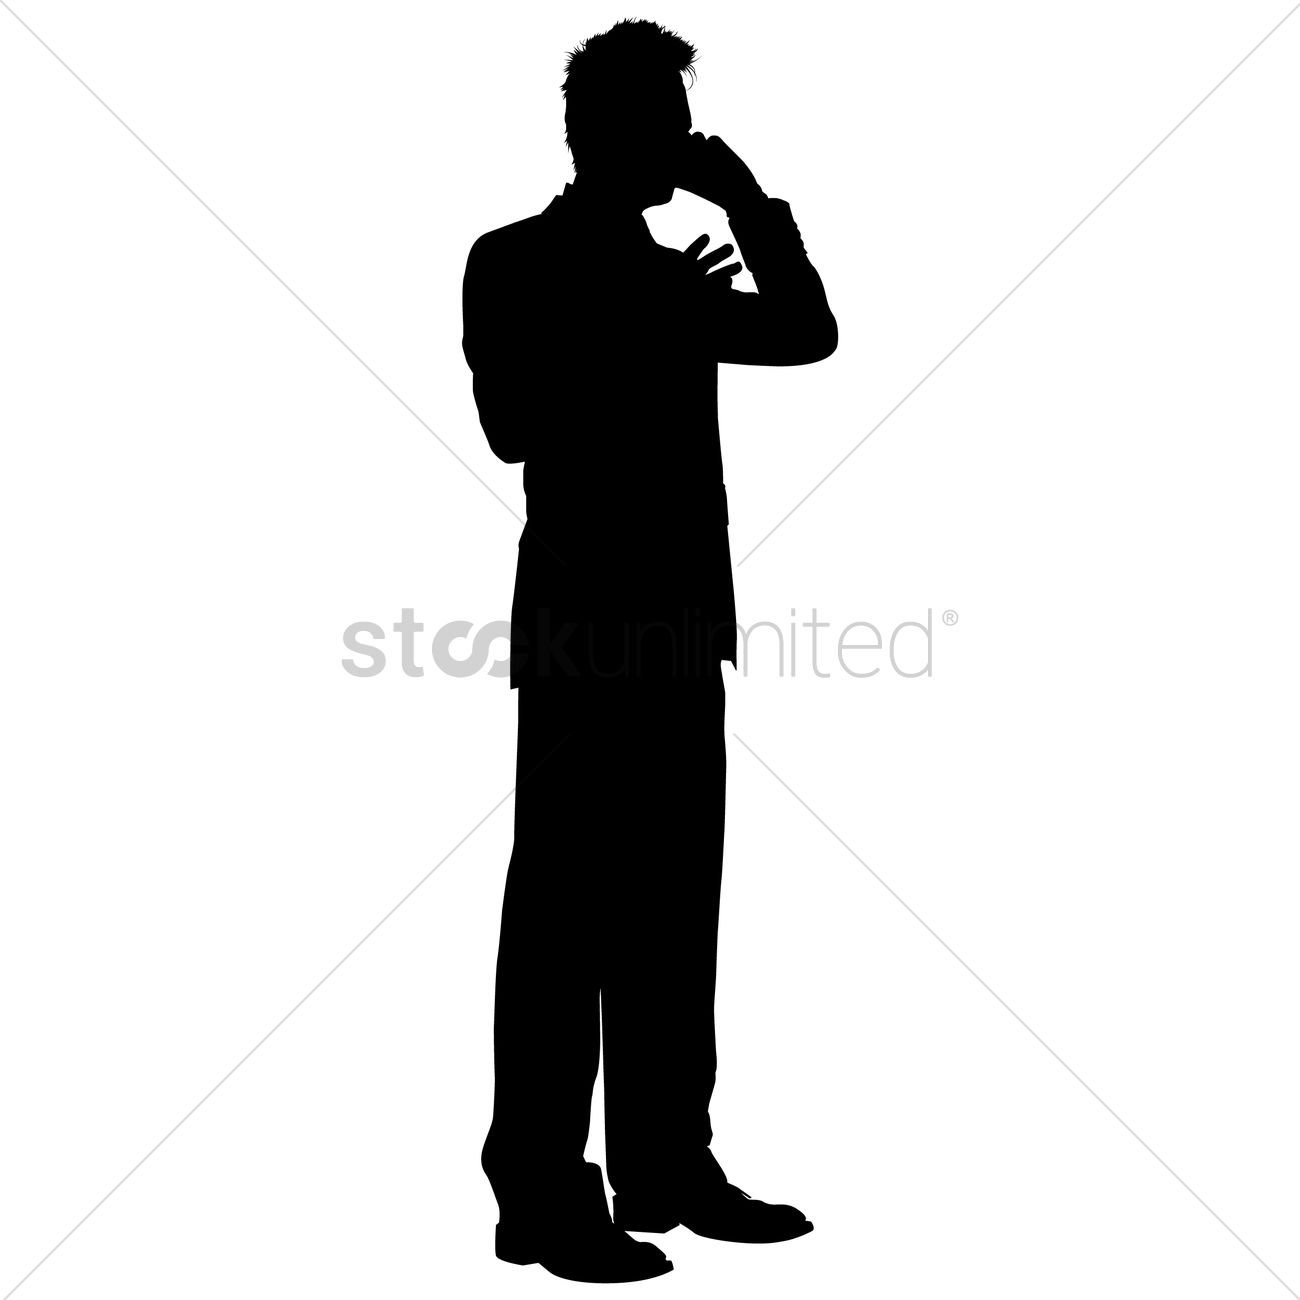 Phone Silhouette Vector at Collection of